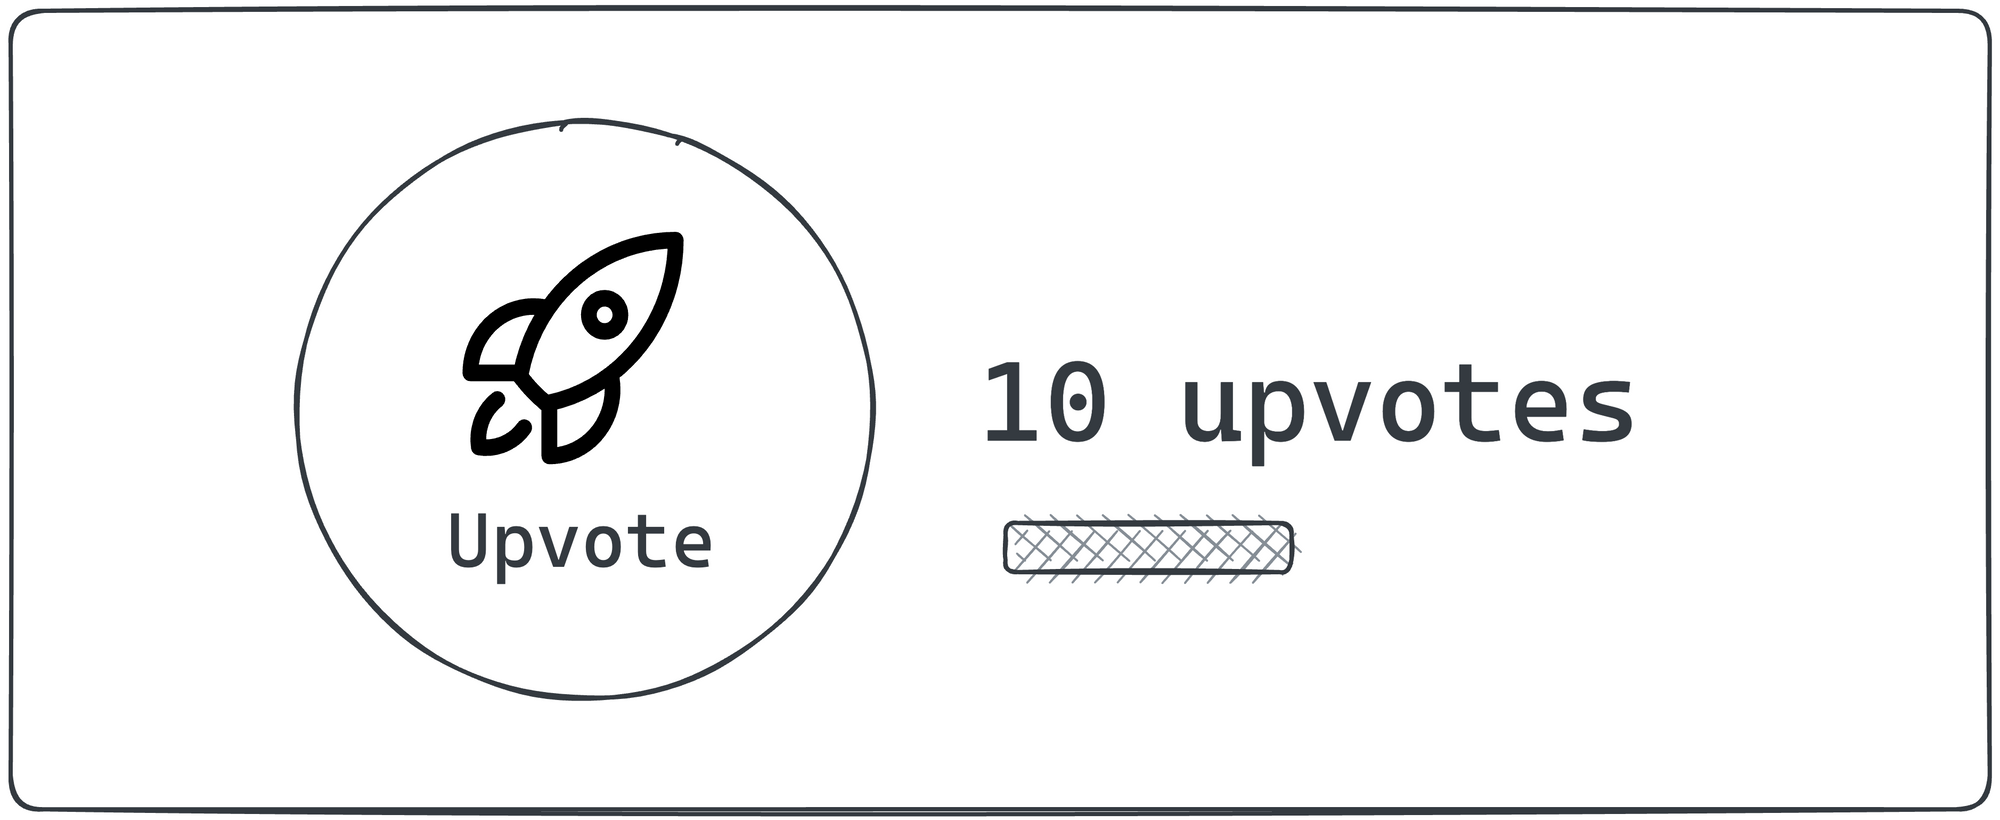 The upvote counter illustrated.